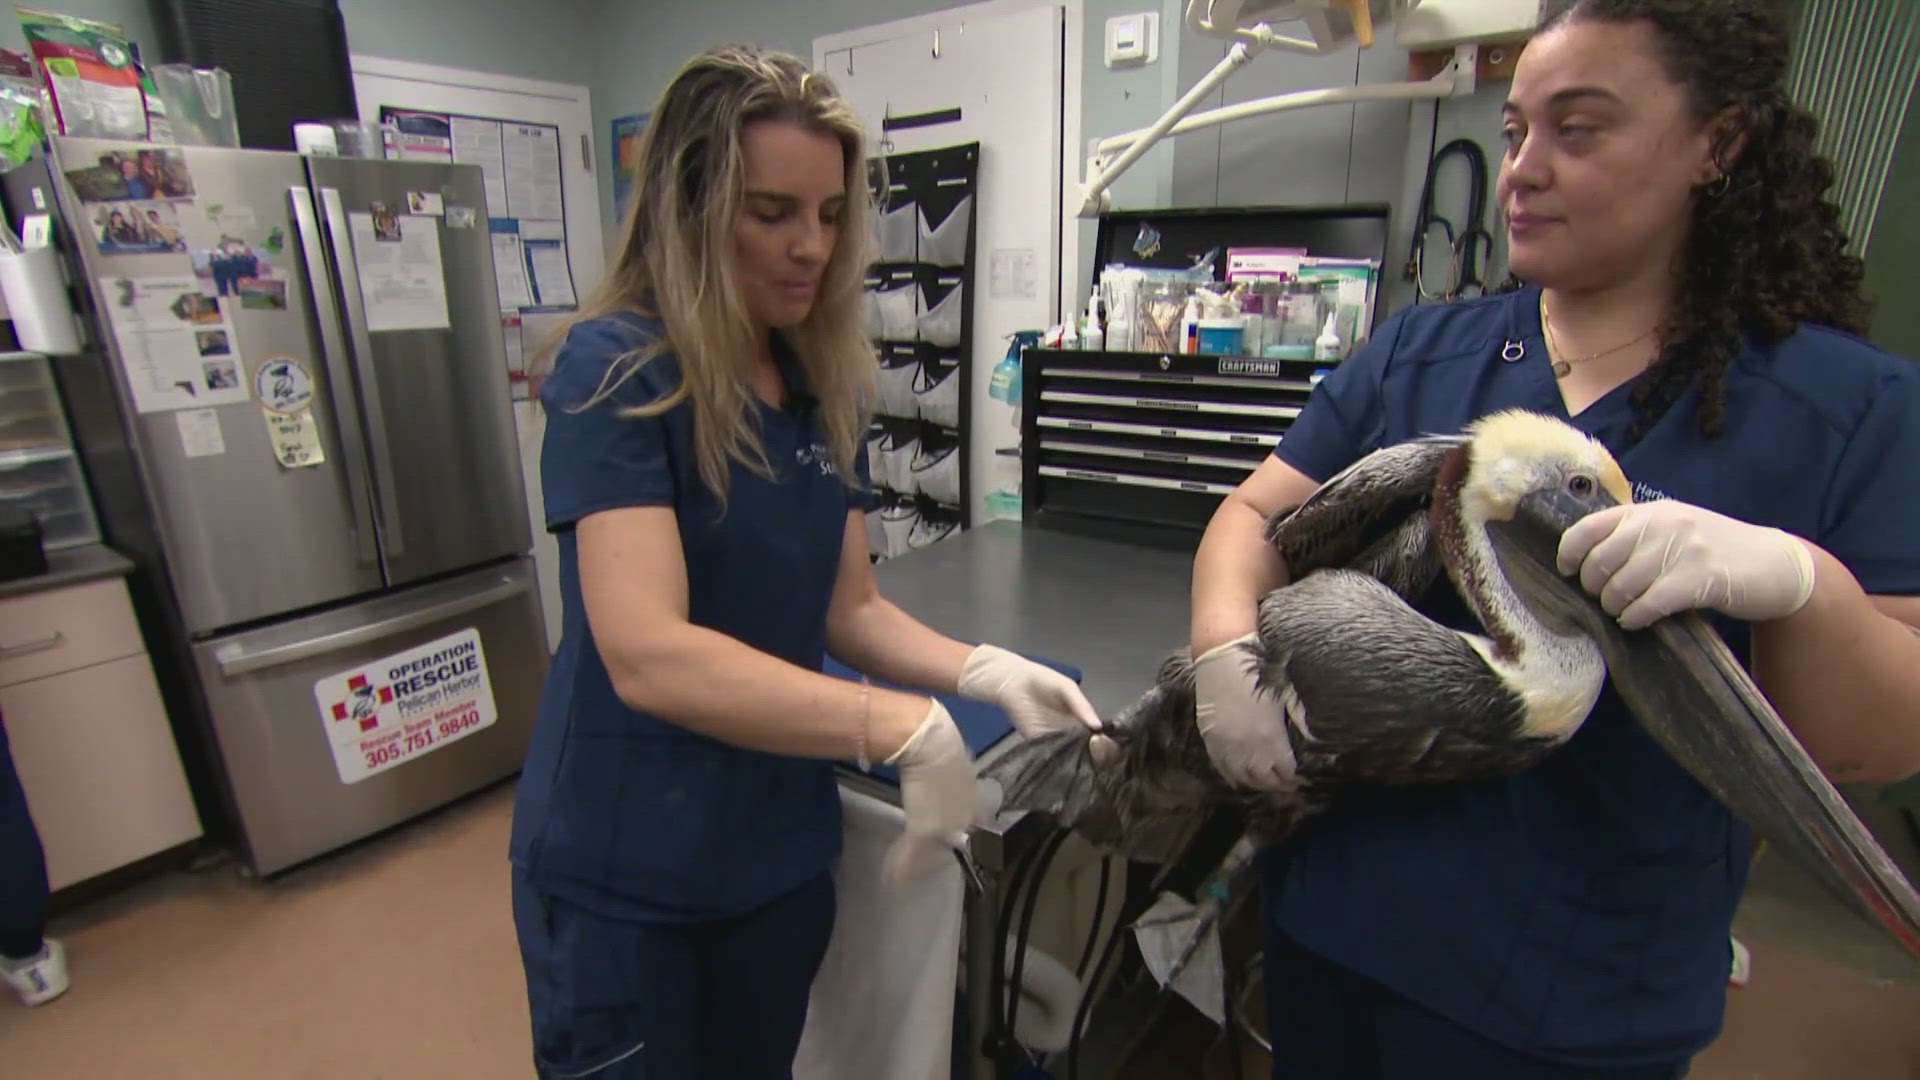 Lately, it's gotten busier. Staff says humans are causing big problems for native animals.